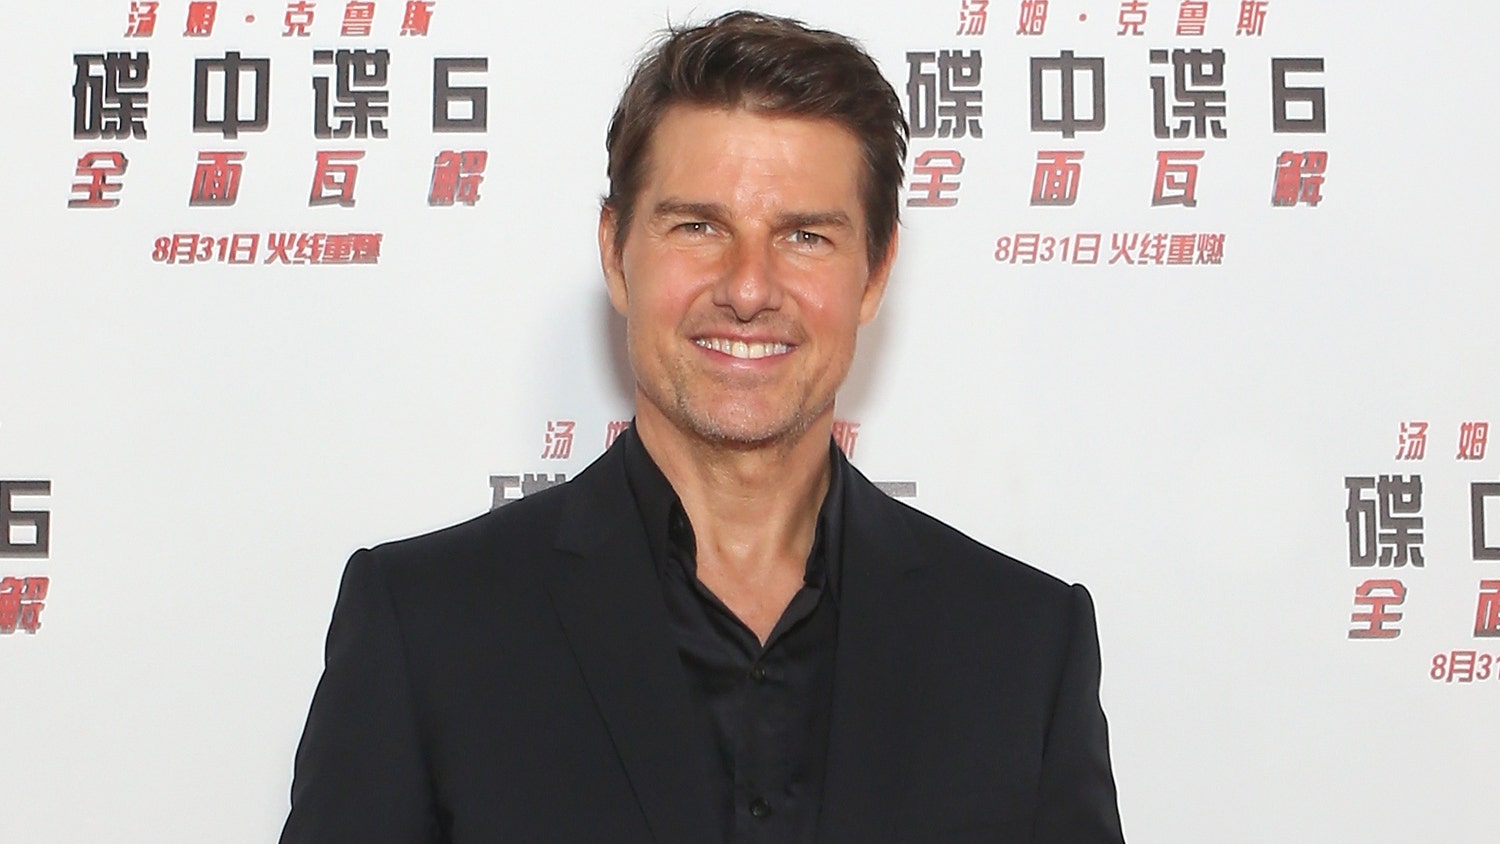 Tom Cruise returns his Golden Globes amid HFPA controversy - Fox News